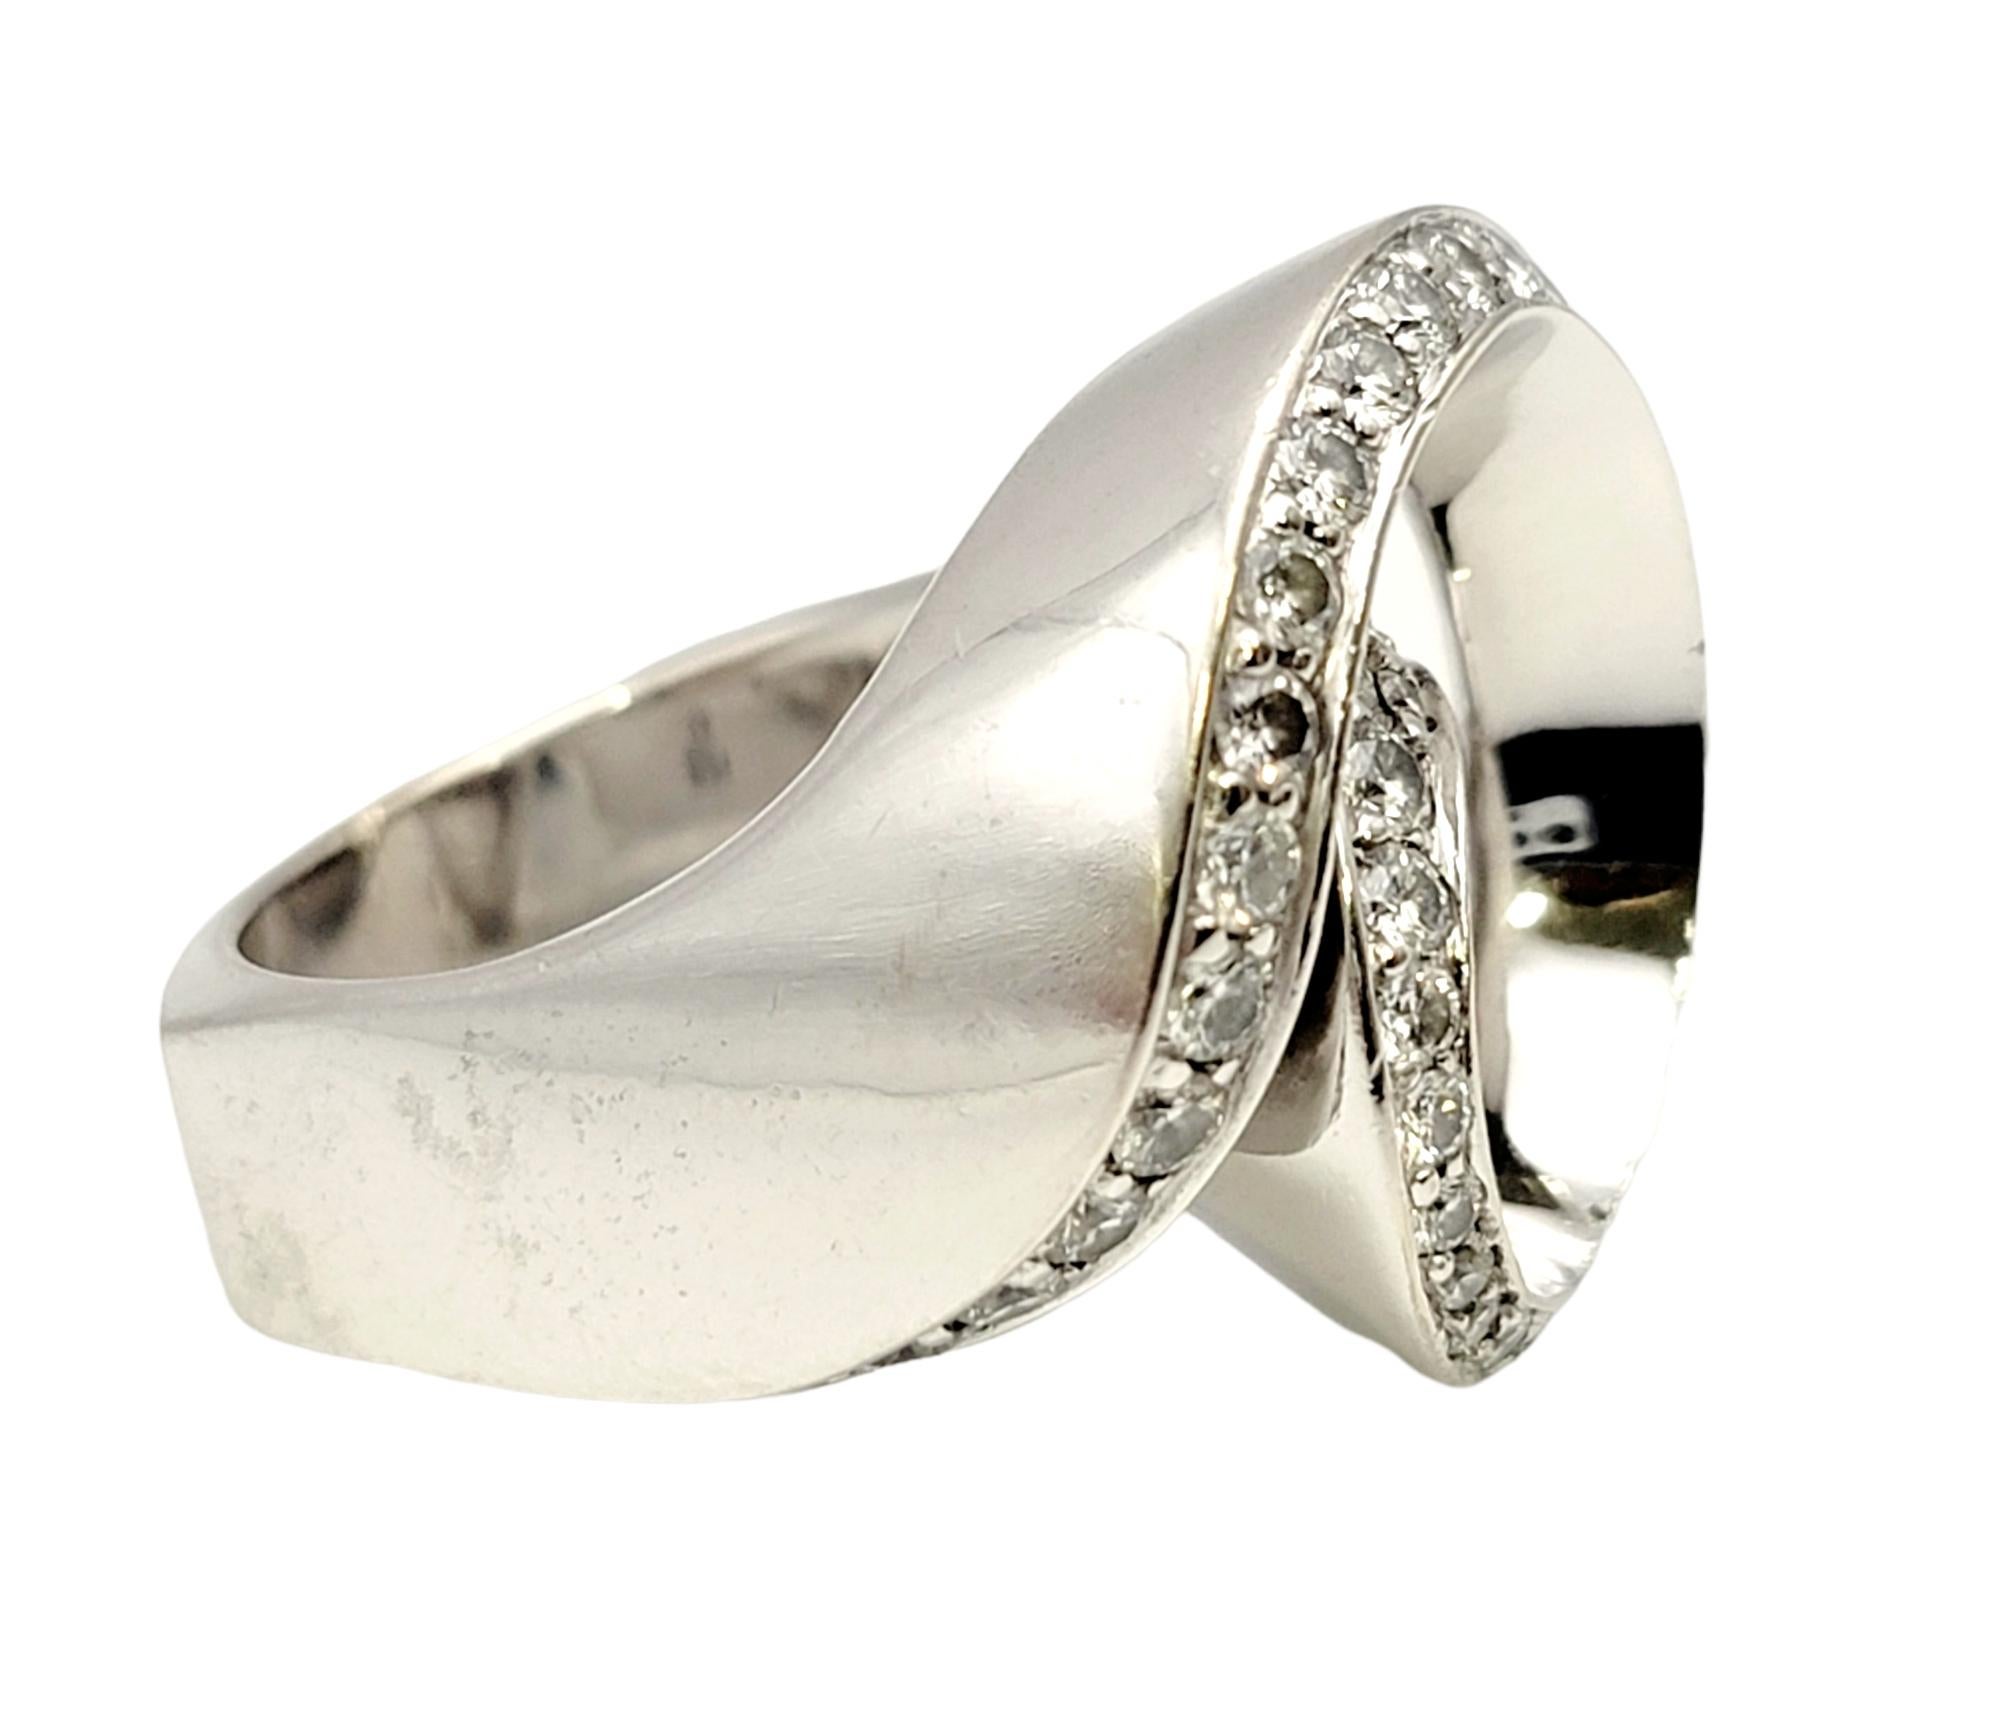 Gauthier Contemporary Diamond Asymmetric Swirl Ring in 14 Karat White Gold In Good Condition For Sale In Scottsdale, AZ